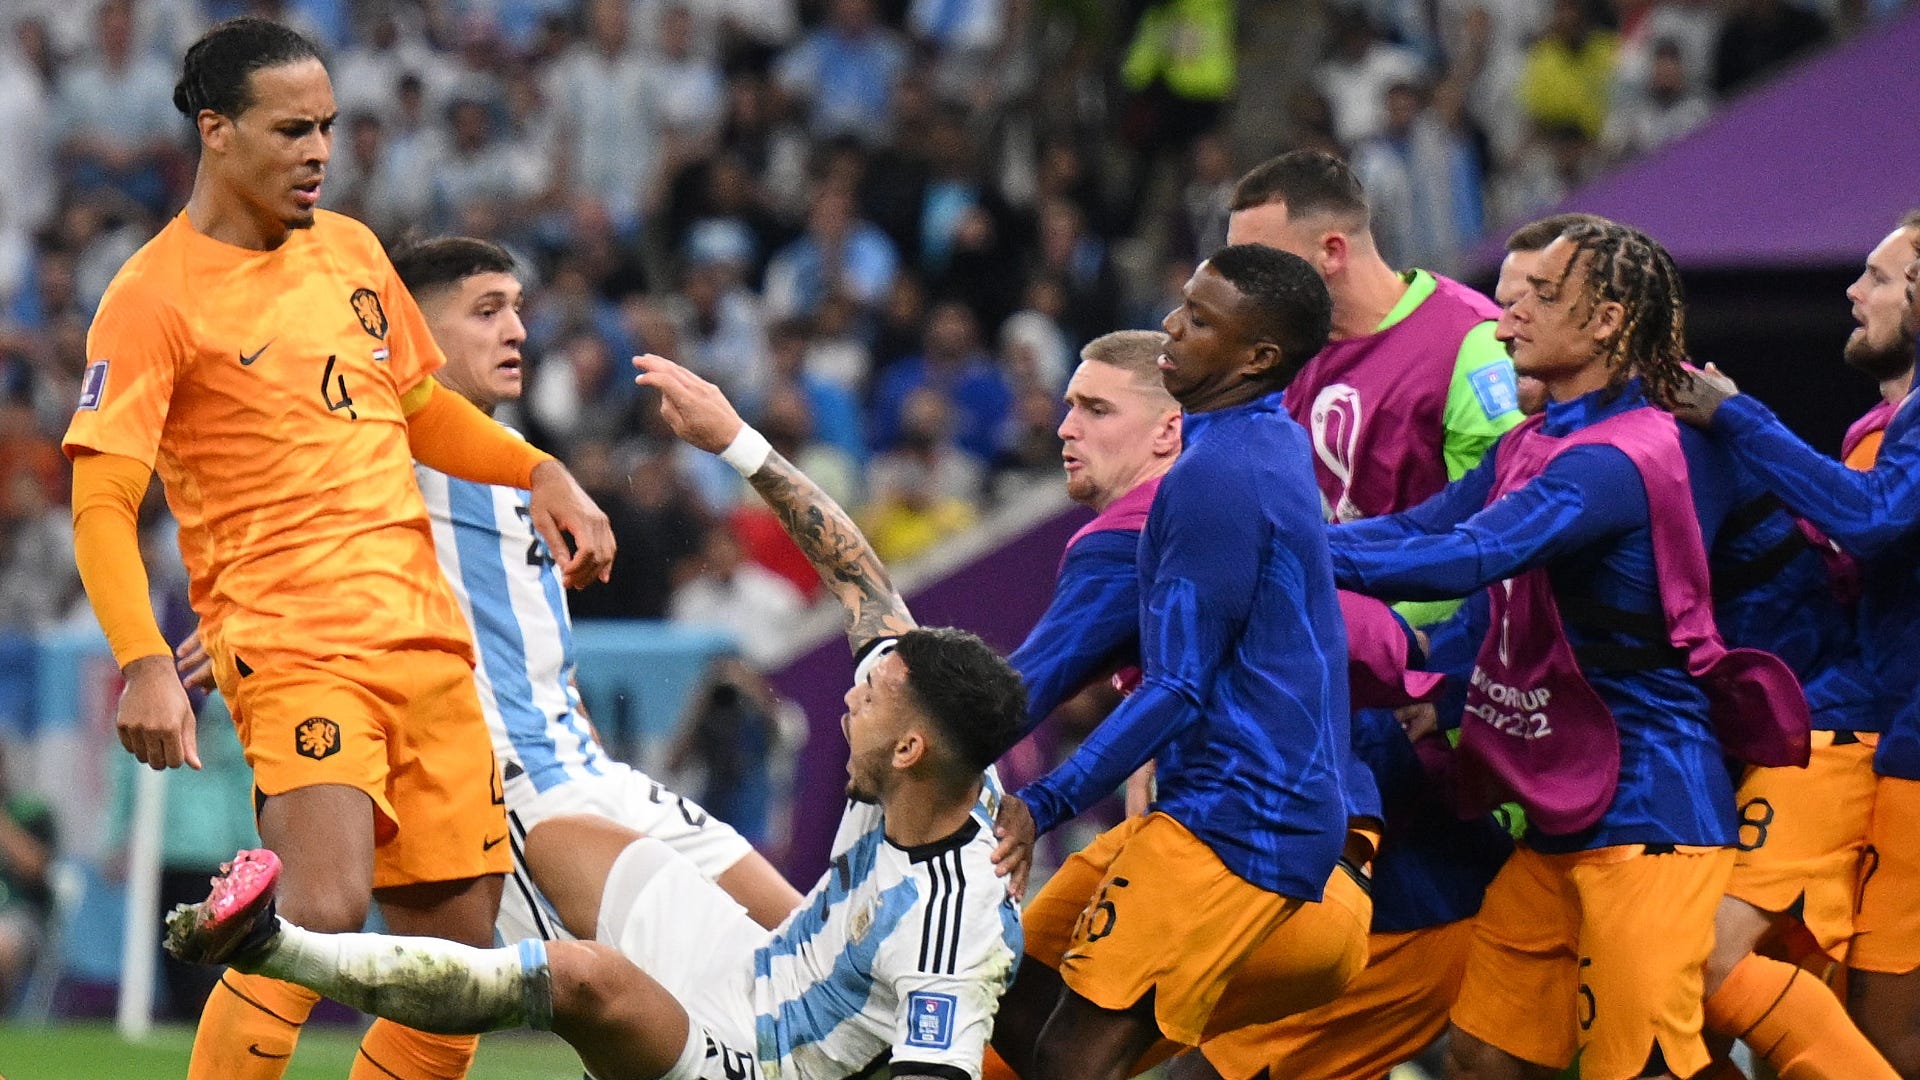 WATCH: Van Dijk FLATTENS him! Argentina star Paredes nearly starts a riot  by booting ball into Netherlands bench during World Cup quarter-final |  